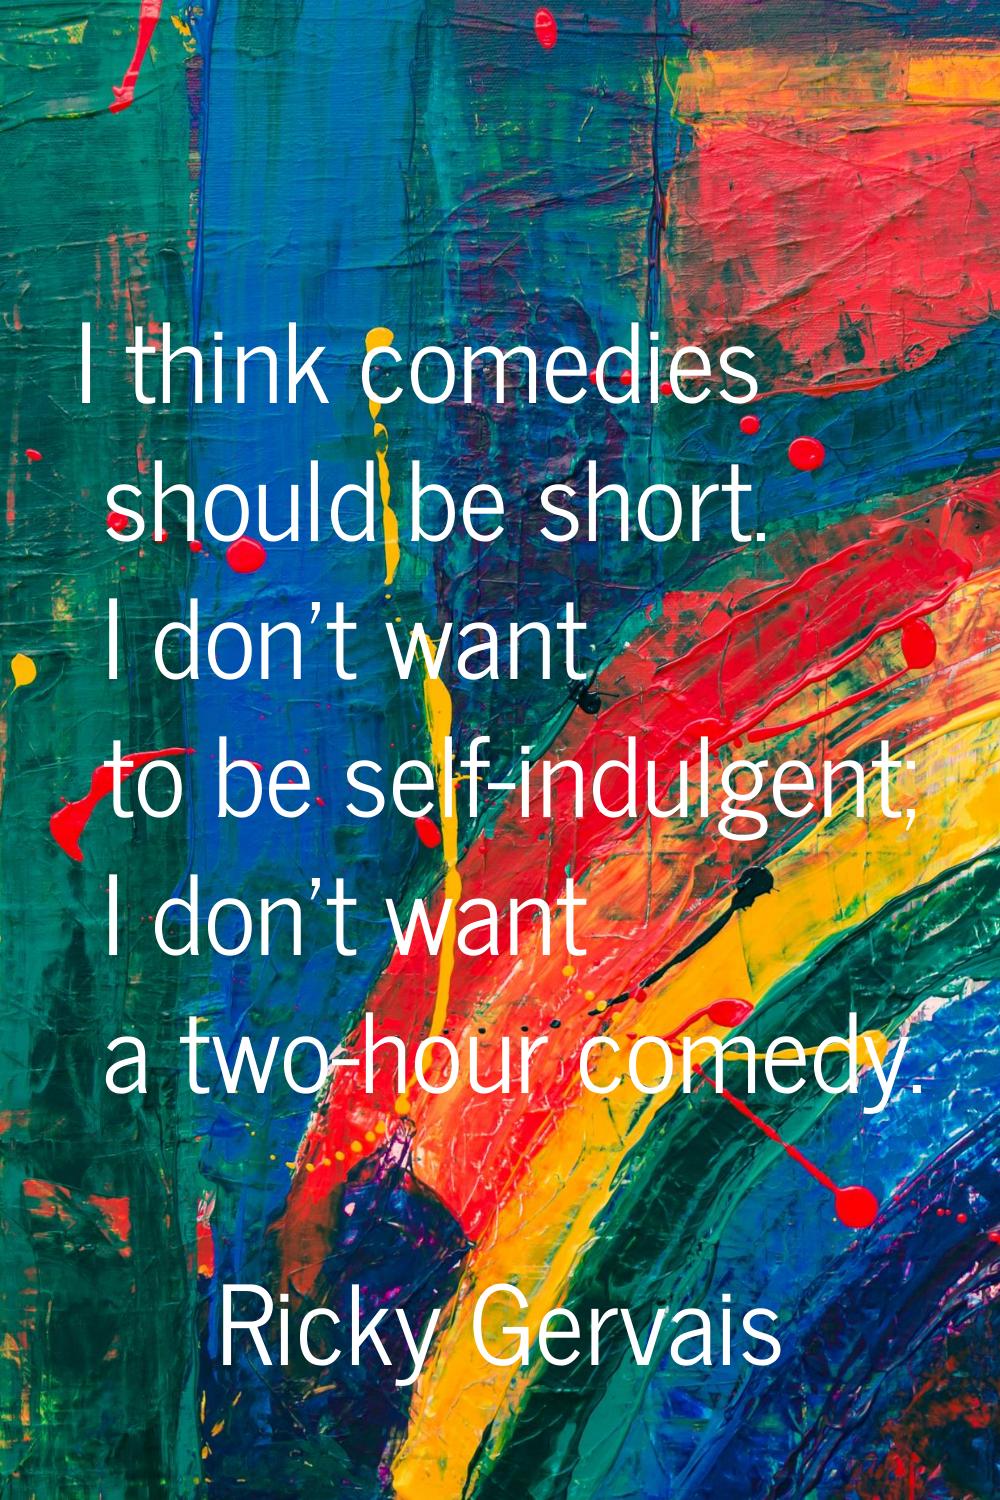 I think comedies should be short. I don't want to be self-indulgent; I don't want a two-hour comedy